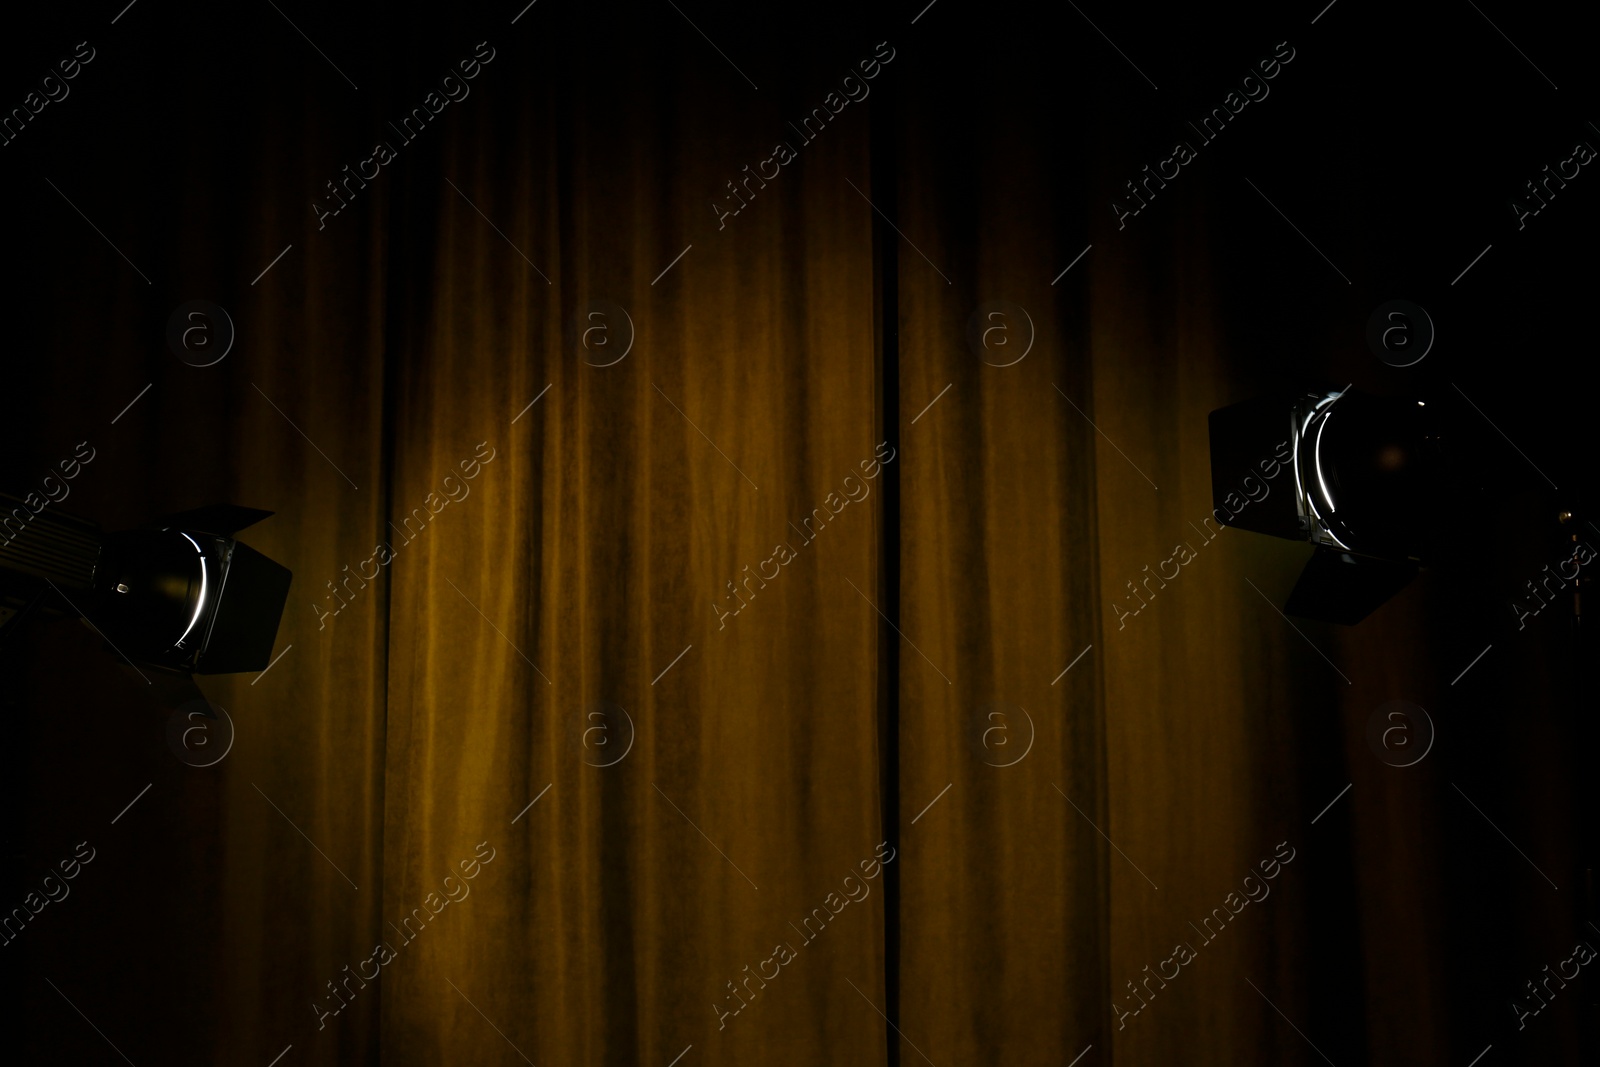 Photo of Theater curtains illuminated by spotlights in darkness